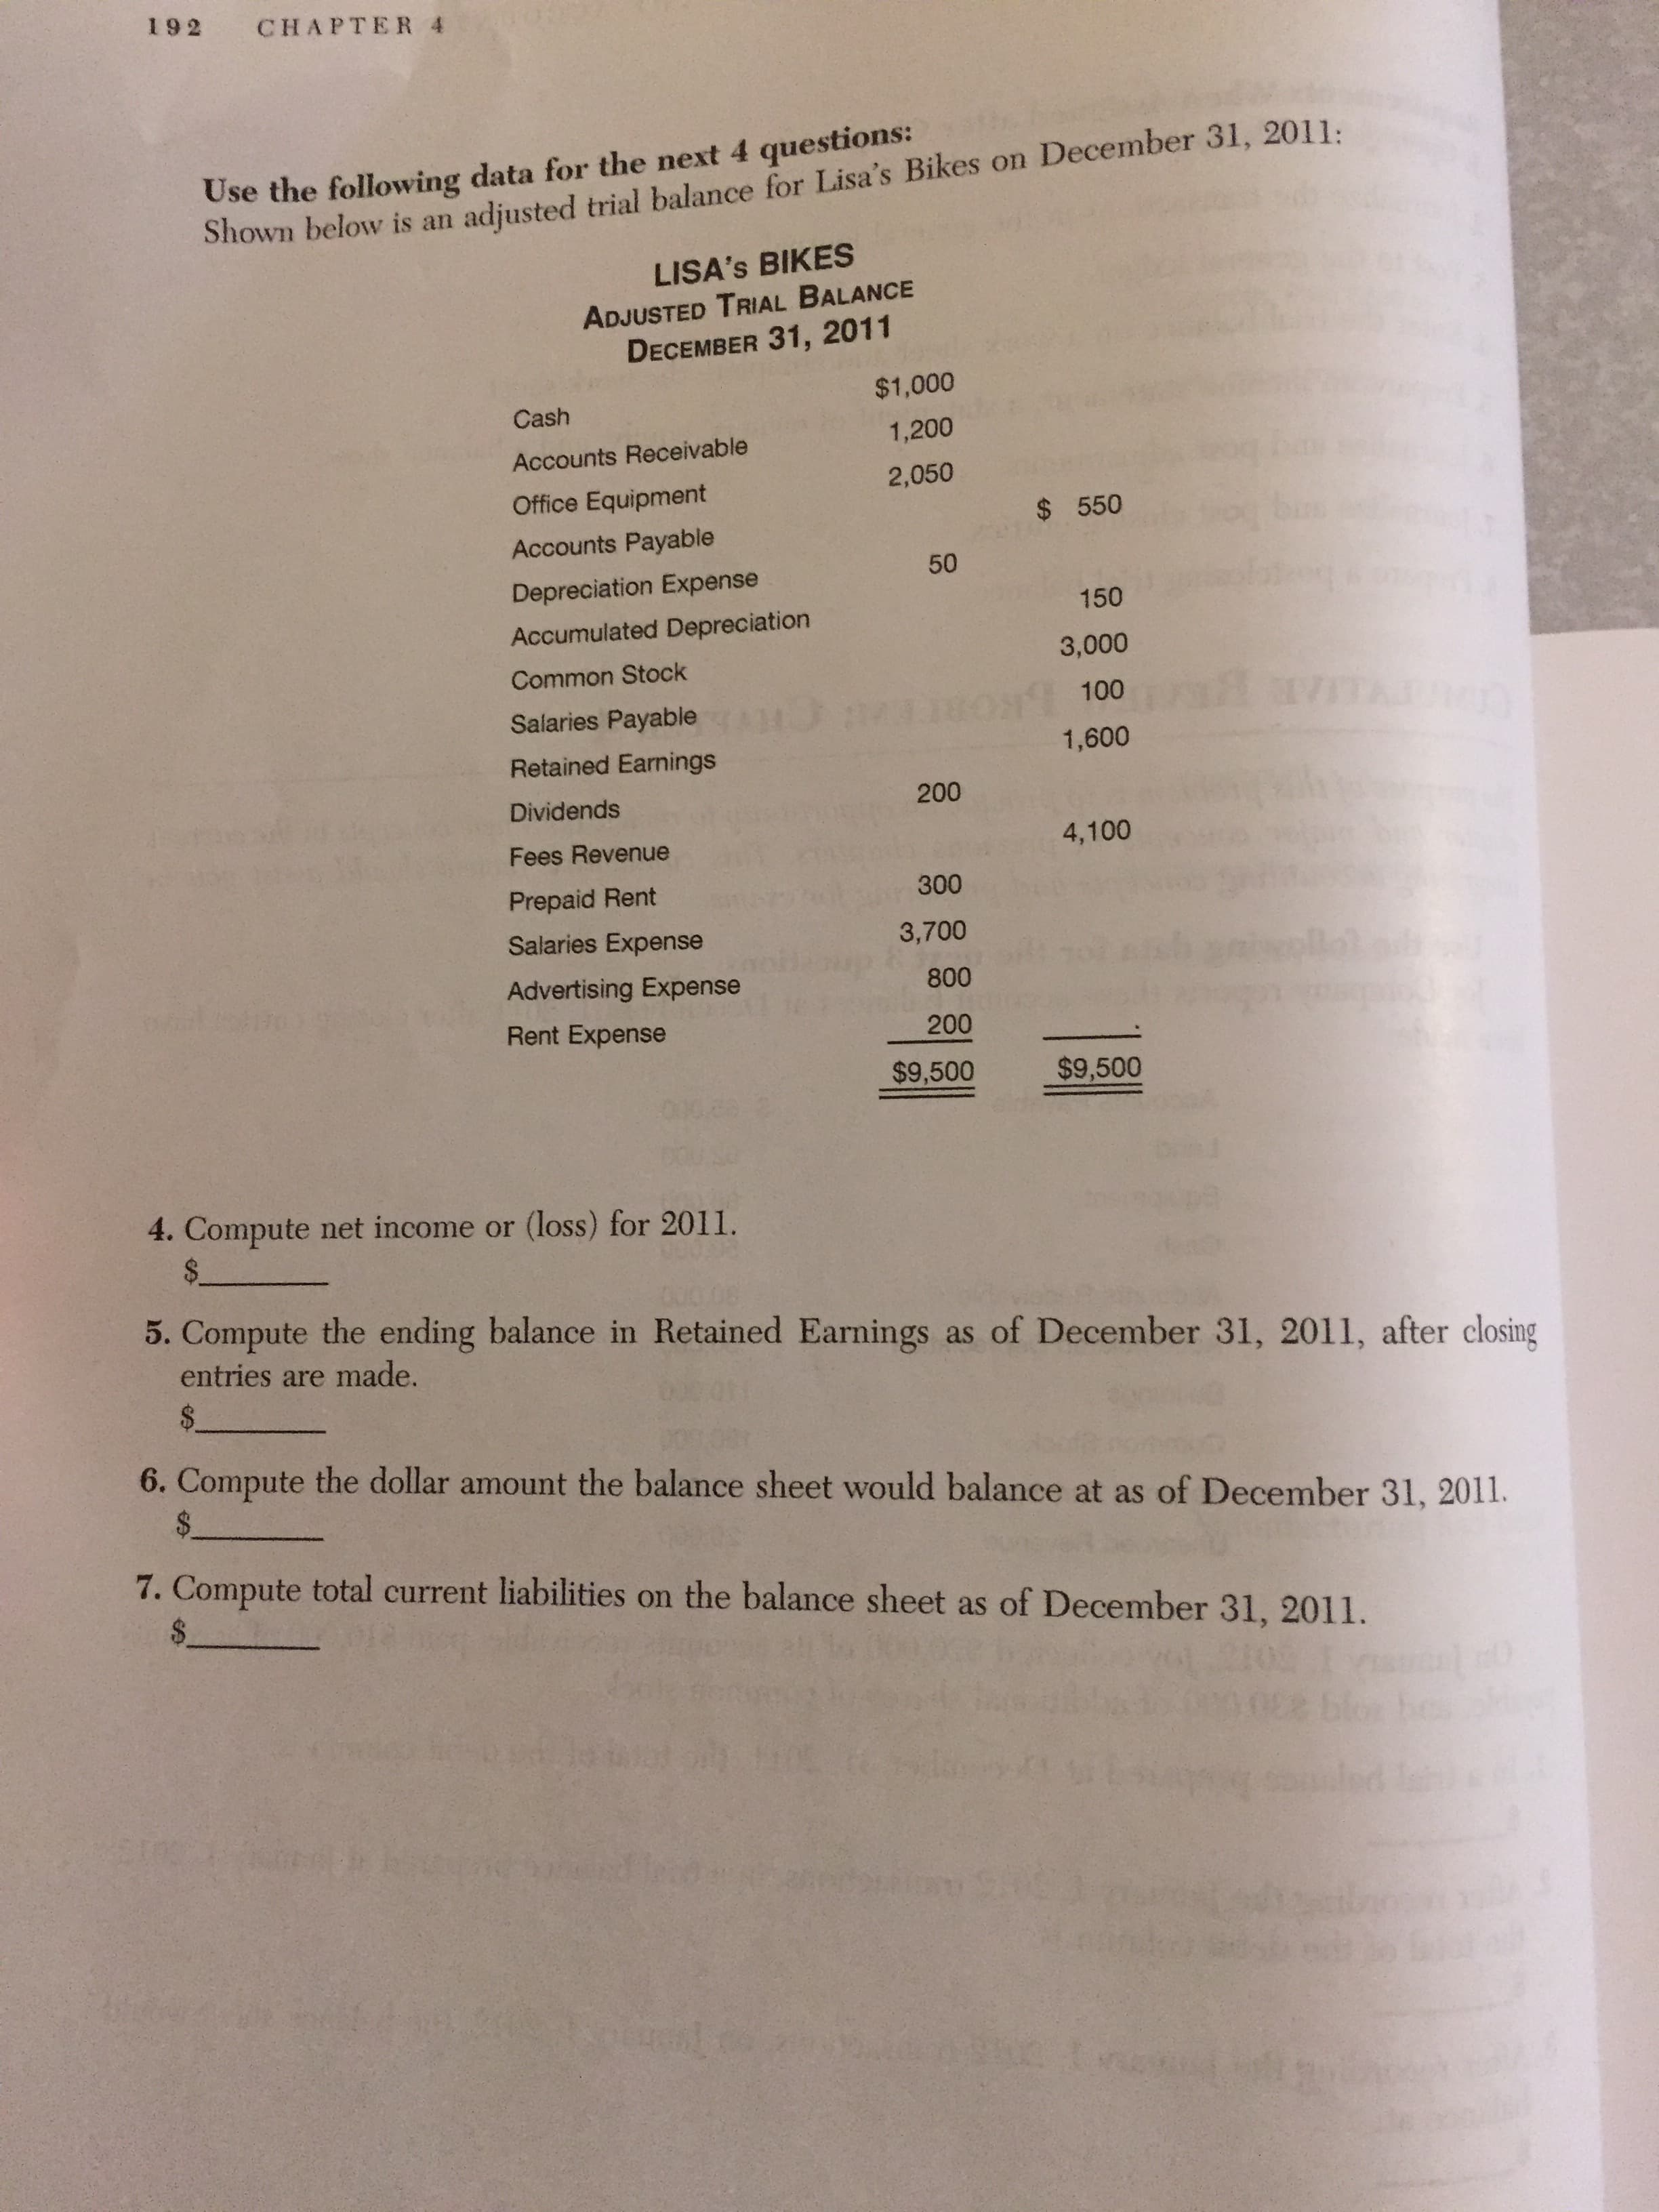 192
CHAPTER 4
Use the following data for the next 4 questions:
Shown below is an
adjusted trial balance for Lisa's Bikes on December 31, 2011:
LISA's BIKES
ADJUSTED TRIAL BALANCE
DECEMBER 31, 2011
$1,000
Cash
1,200
Accounts Receivable
2,050
Office Equipment
$ 550
Accounts Payable
Depreciation Expense
150
Accumulated Depreciation
3,000
Common Stock
IOA
100
Salaries Payable
1,600
Retained Earnings
200
Dividends
4,100
Fees Revenue
300
Prepaid Rent
Salaries Expense
3,700
Advertising Expense
800
Rent Expense
200
$9,500
$9,500
4. Compute net income or (loss) for 2011.
$
08
5. Compute the ending balance in Retained Earnings as of December 31, 2011, after closing
entries are made.
$
6. Compute the dollar amount the balance sheet would balance at as of December 31, 2011
7. Compute total current liabilities on the balance sheet as of December 31, 2011
$
le)
bo
Mww
50
